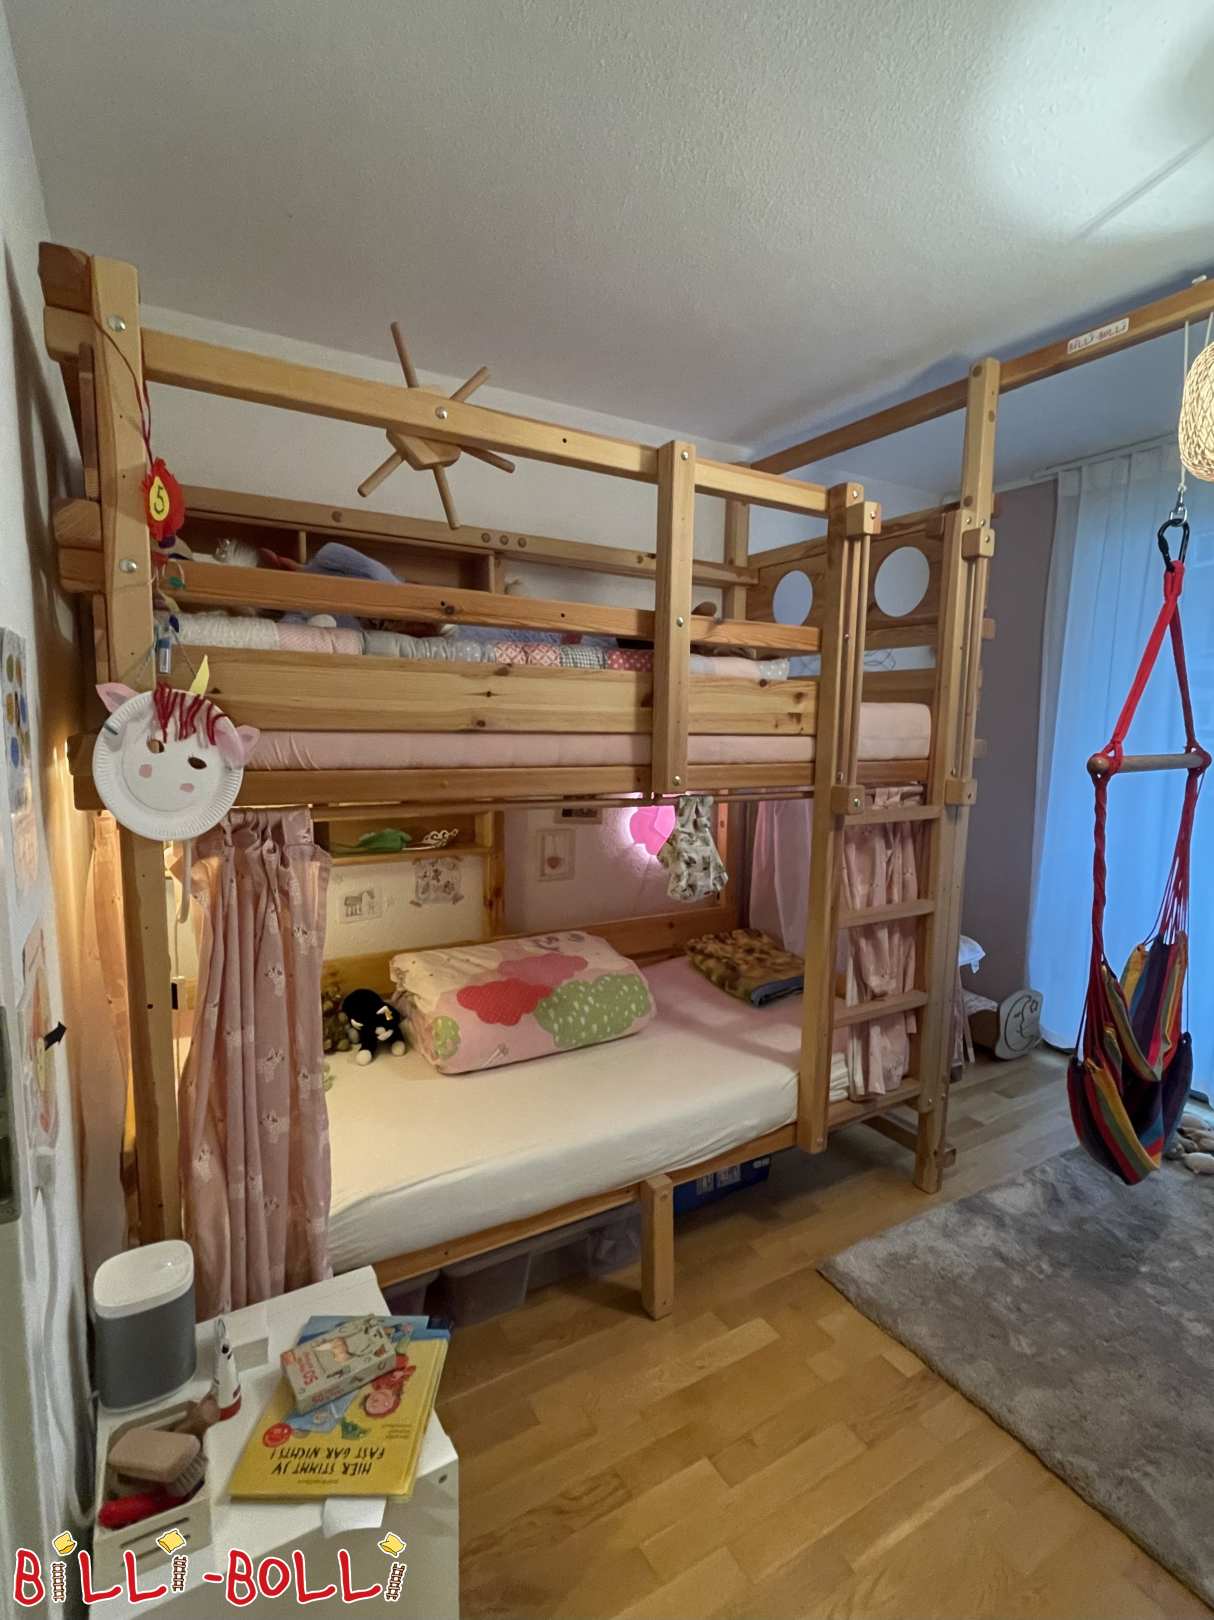 Bunk bed with lots of accessories (Category: Bunk Bed pre-owned)